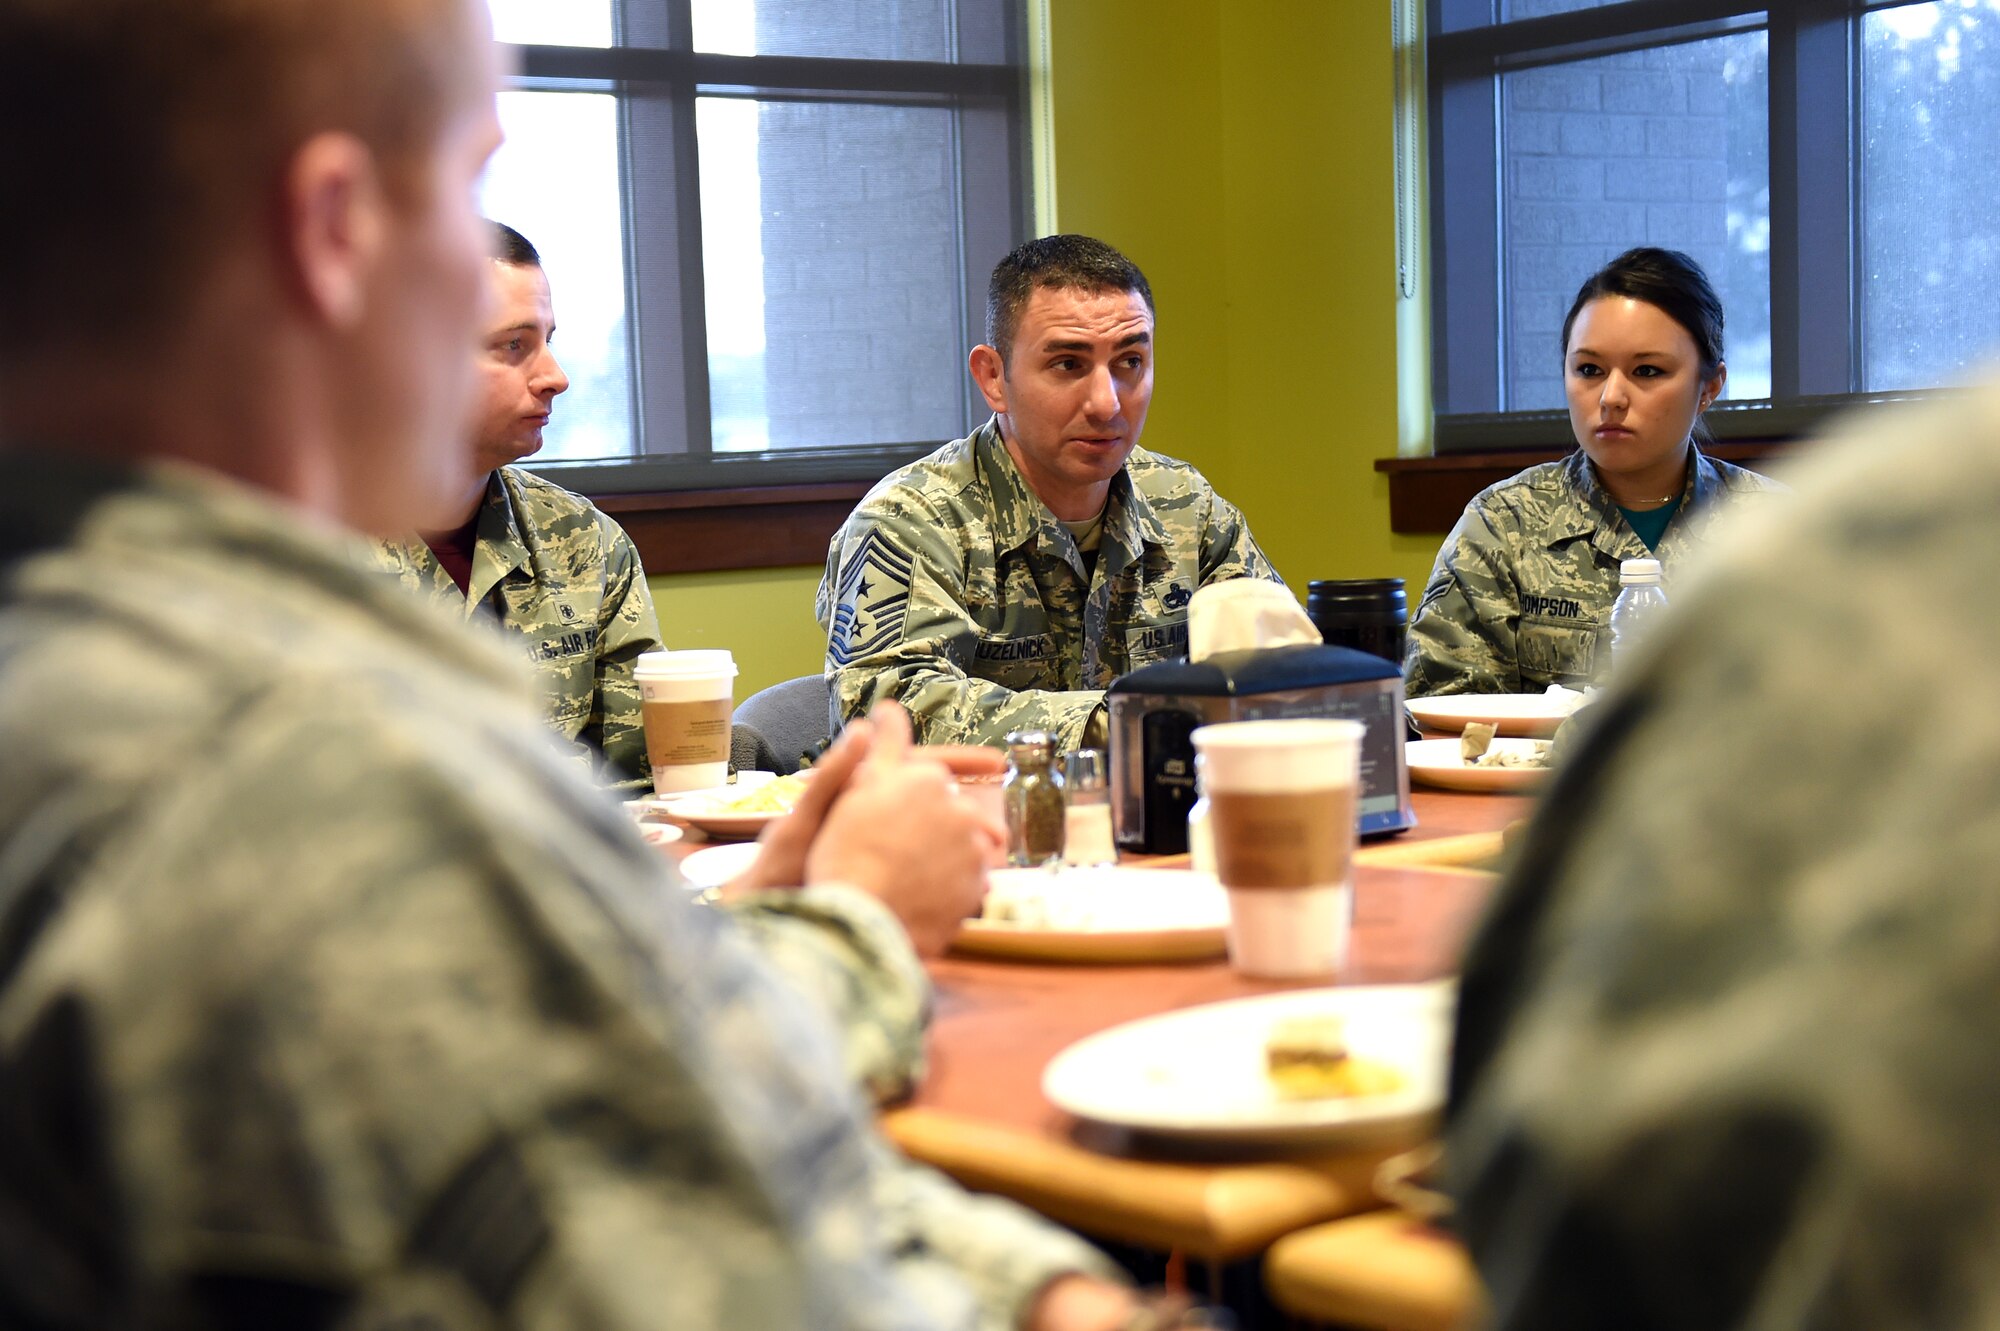 Chief Master Sgt. Brian Kruzelnick, 460th Space Wing command chief, takes notes during a breakfast with Airmen and the 460th SW commander, Col. John Wagner, Jan. 9, 2015, at the Panther Den on Buckley Air Force Base, Colo. During the breakfast, leadership sought out Airmen’s thoughts and opinions on what they could do to make Buckley the best base in the Air Force. (U.S. Air Force photo by Airman 1st Class Emily E. Amyotte/Released)